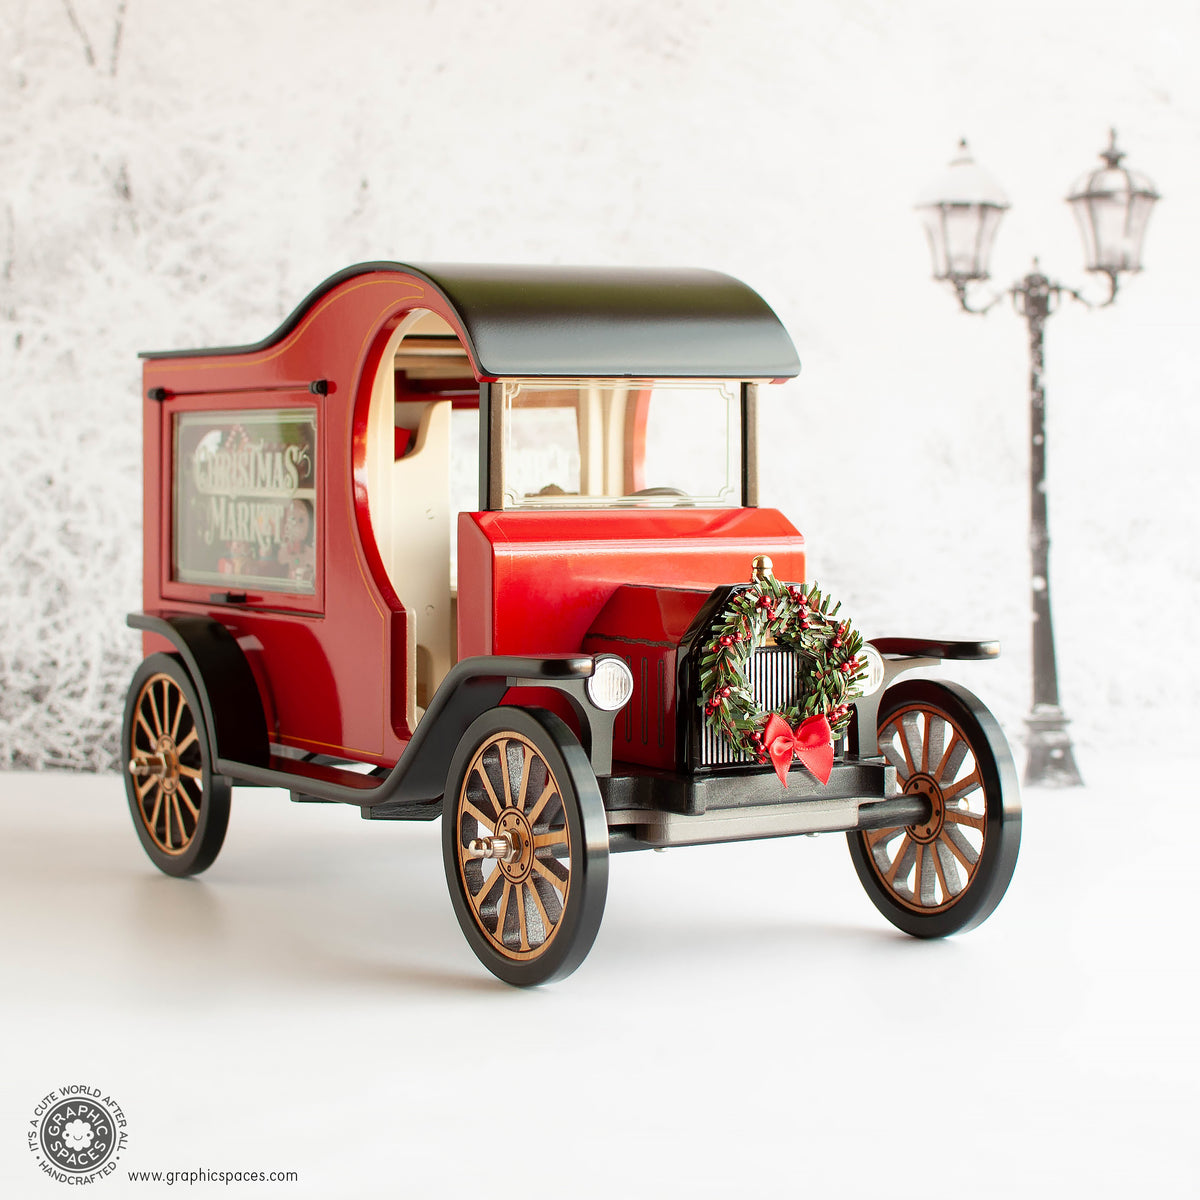 1:12 Scale Room Box Red Christmas Market Truck Model T C Cab. Front angle view showing grille and headlights. Window closed.